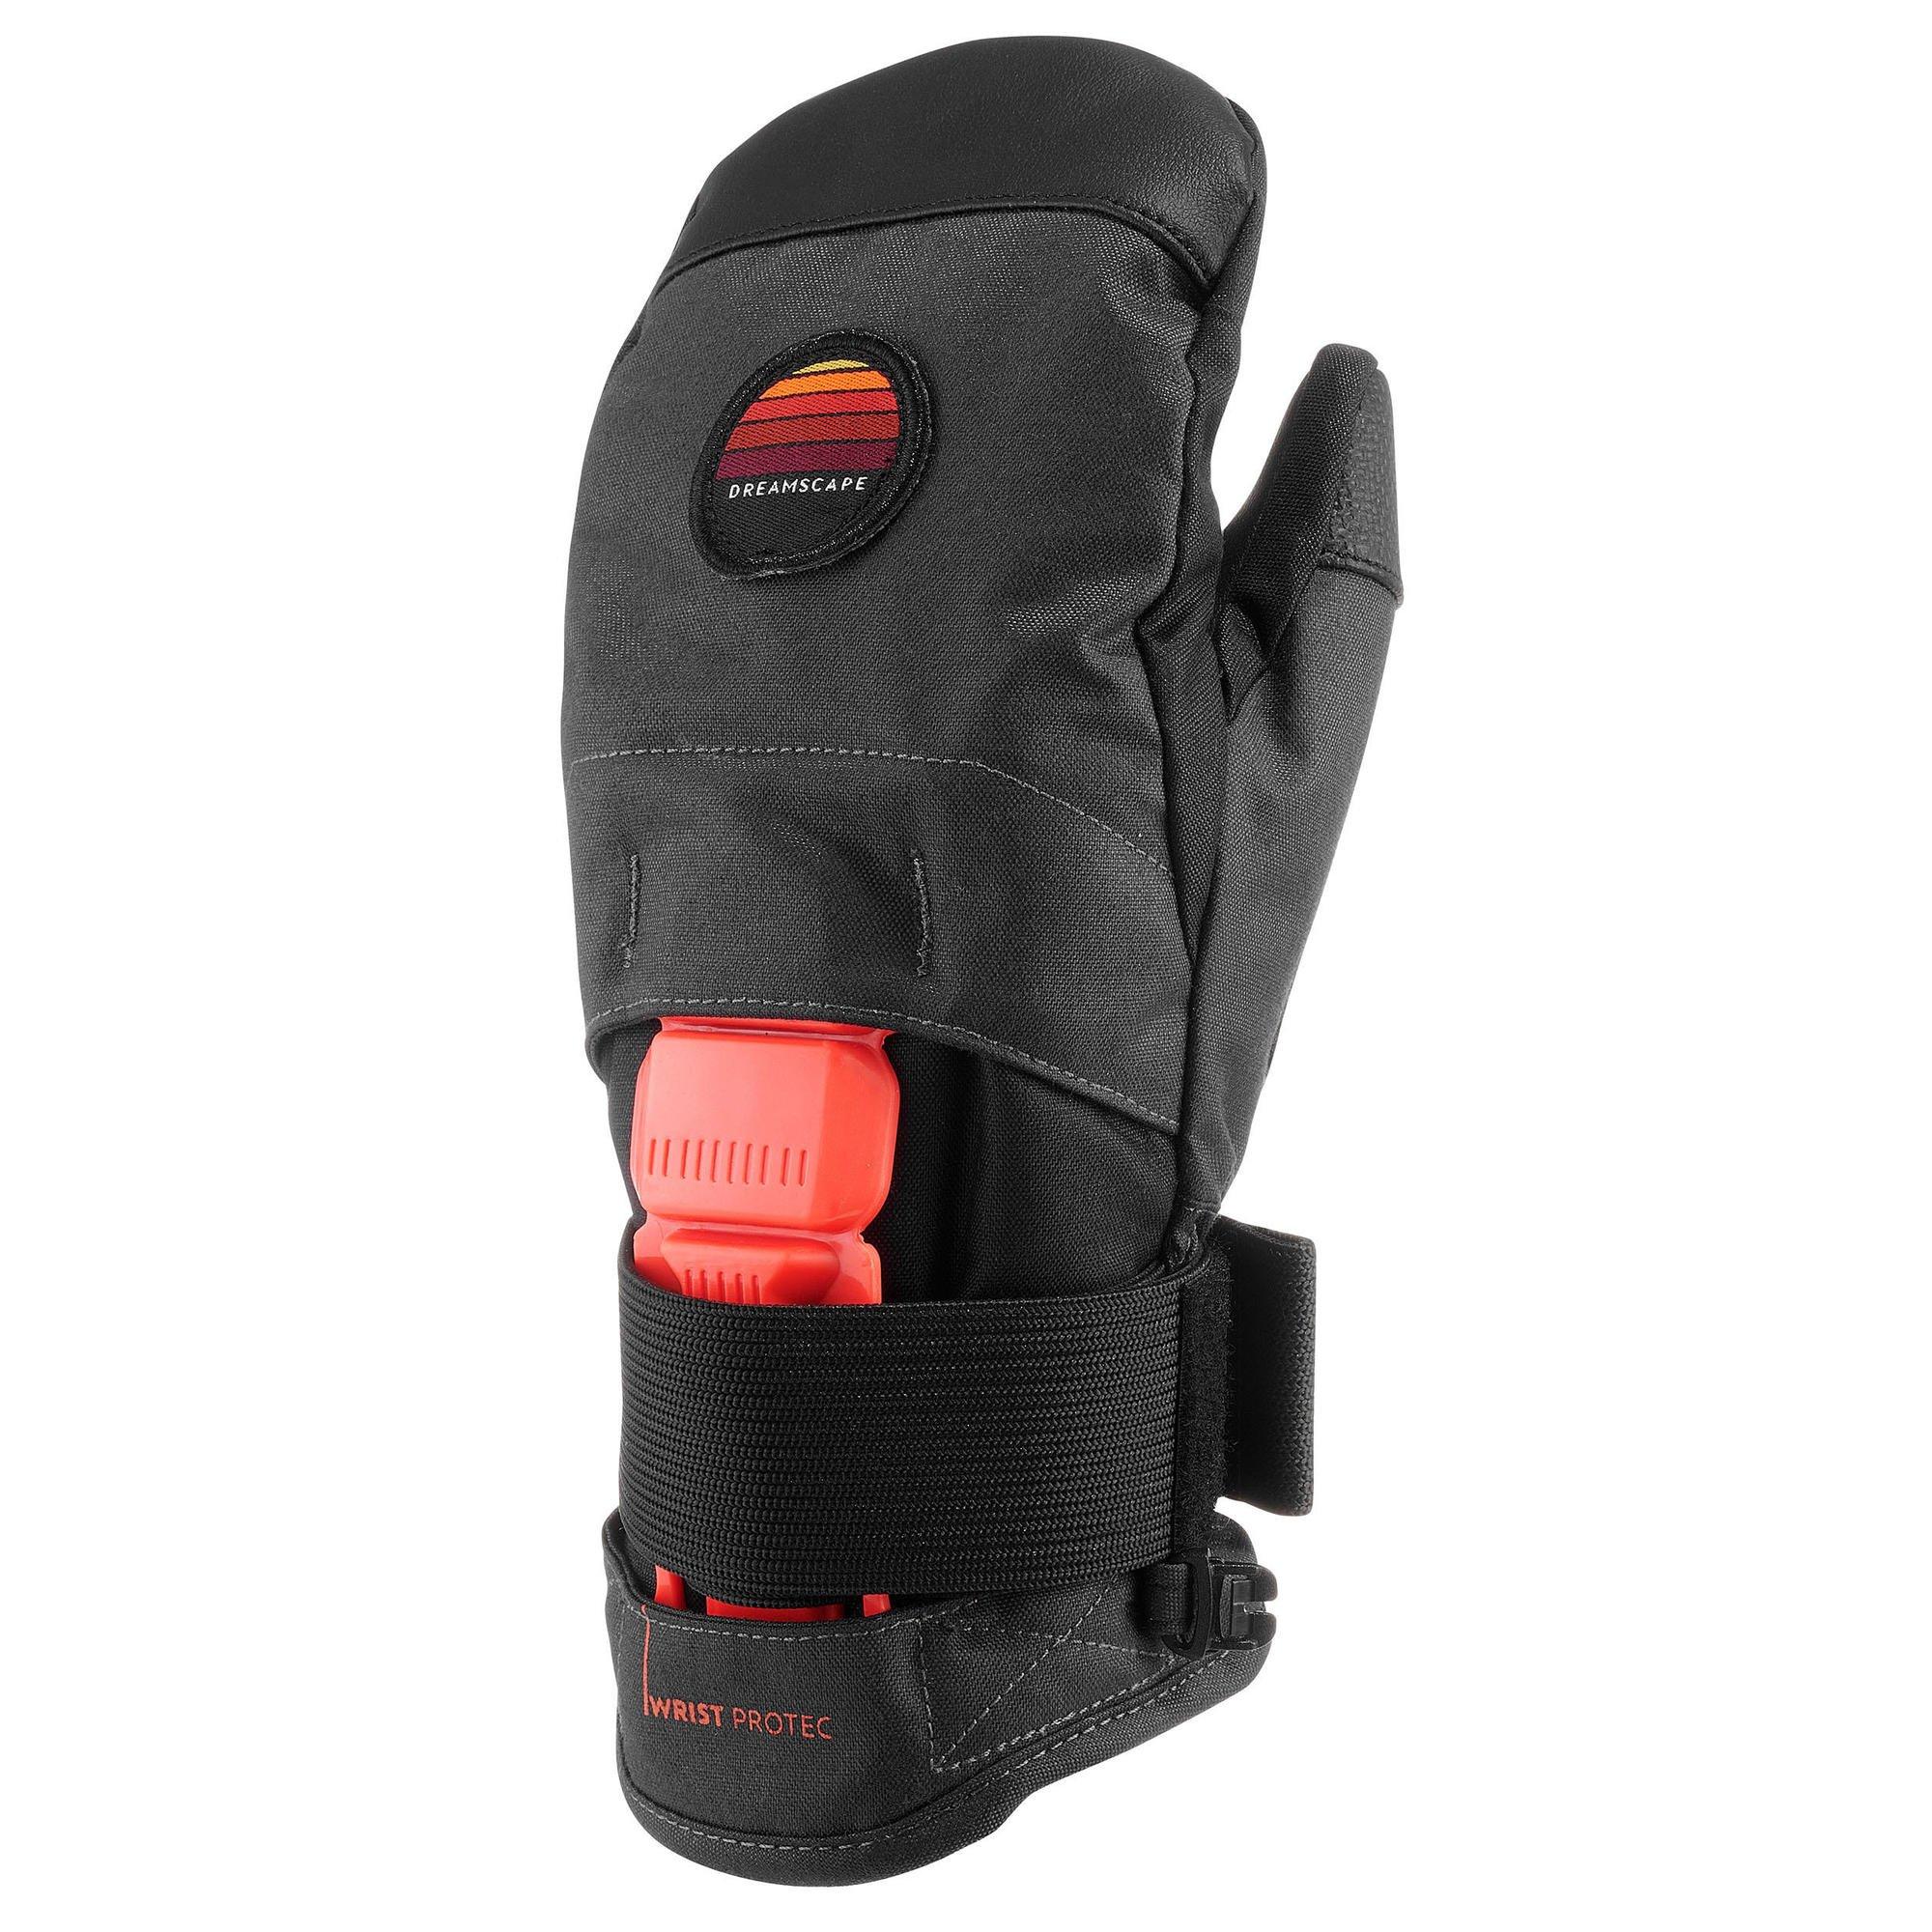 Decathlon Boarding Mittens - Mi 500 Jr Protect,And